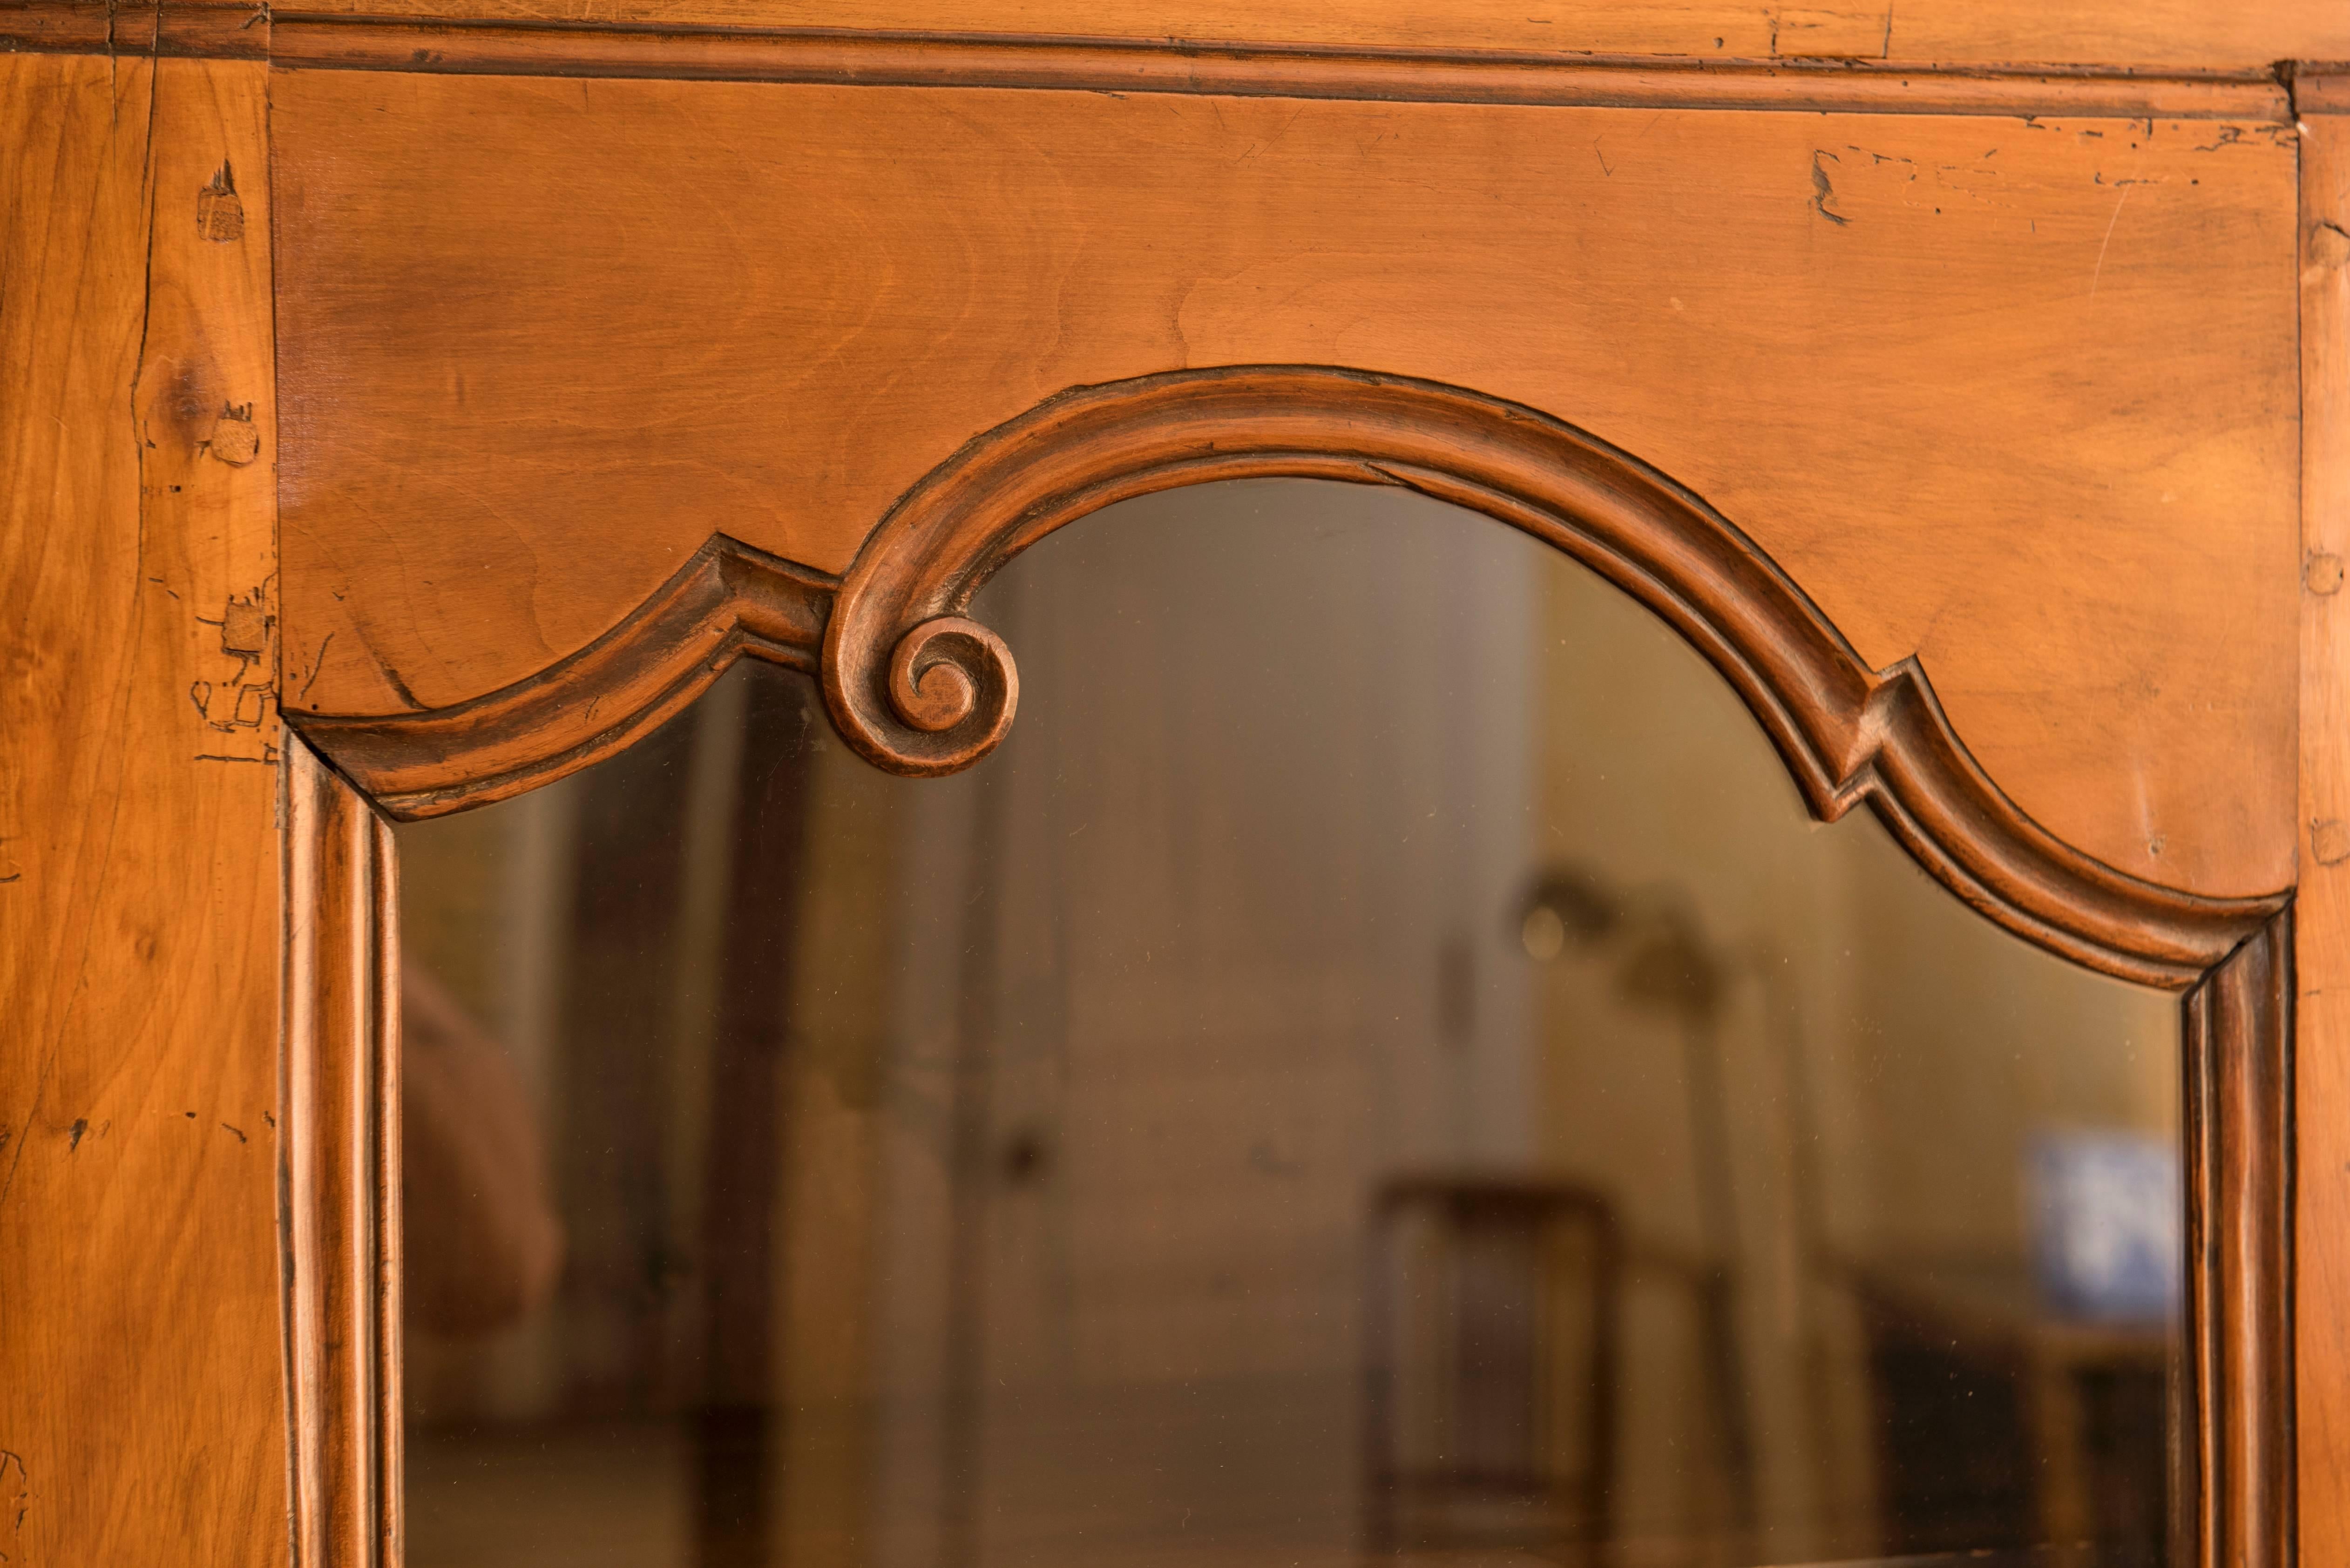 Beautifully carved walnut detailing.